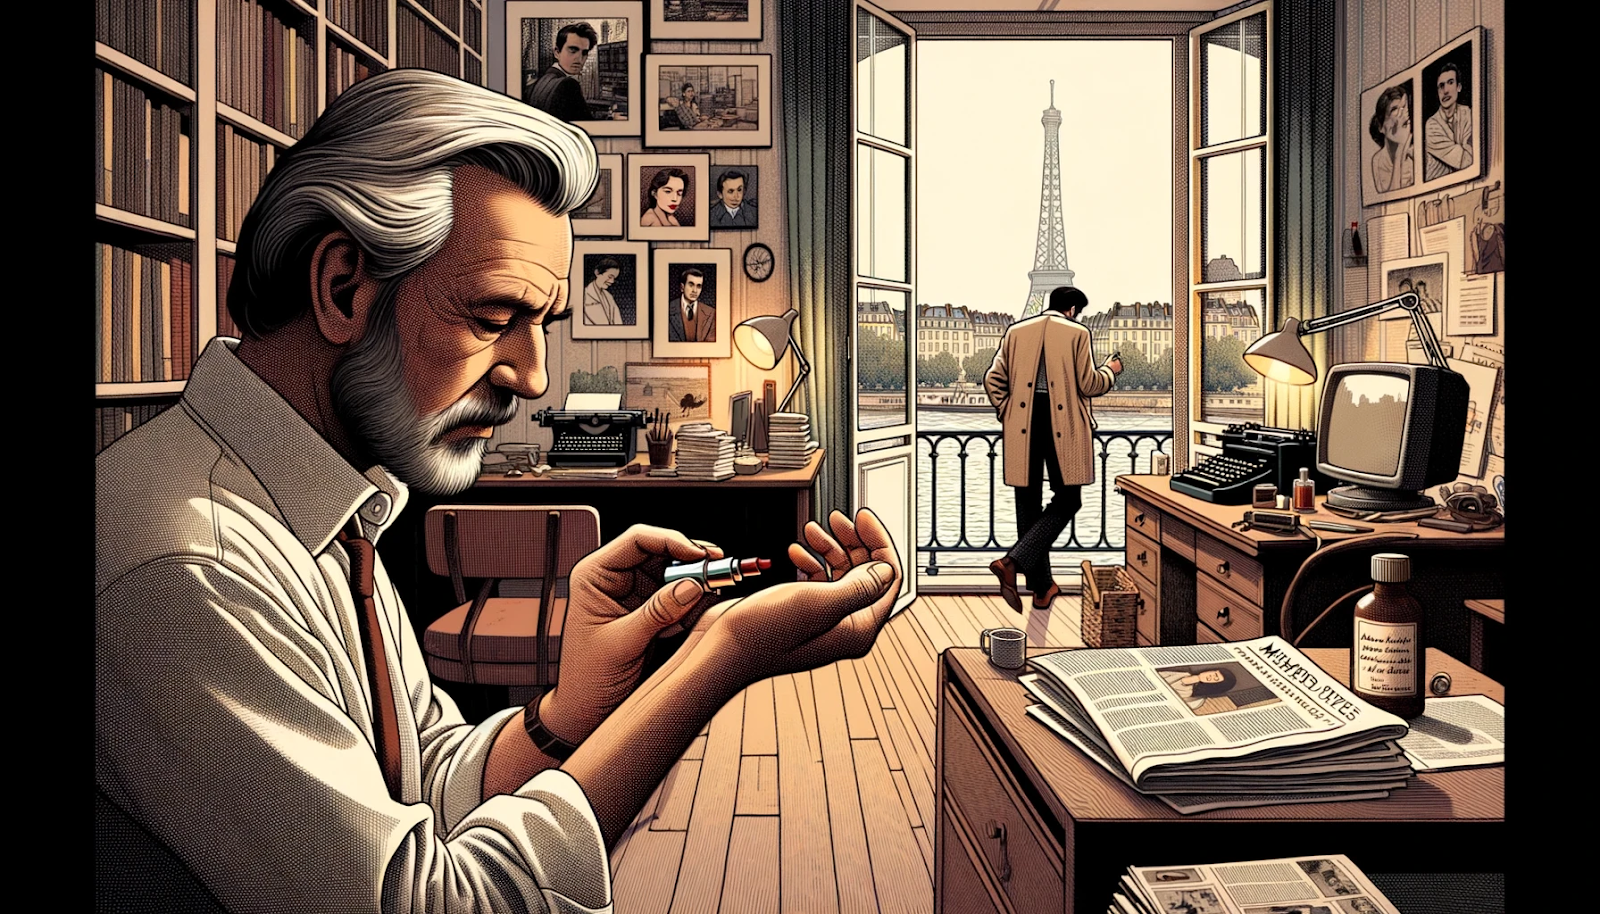 Illustration of Laurent in his apartment overlooking the Seine. He's applying a dab of 'Mémoires Perdues' on his wrist, with a cluttered newsroom and a younger version of himself visible in the background. The scene is tinged with nostalgia, and distant images of Lucie, his first love, add to the sentimentality.